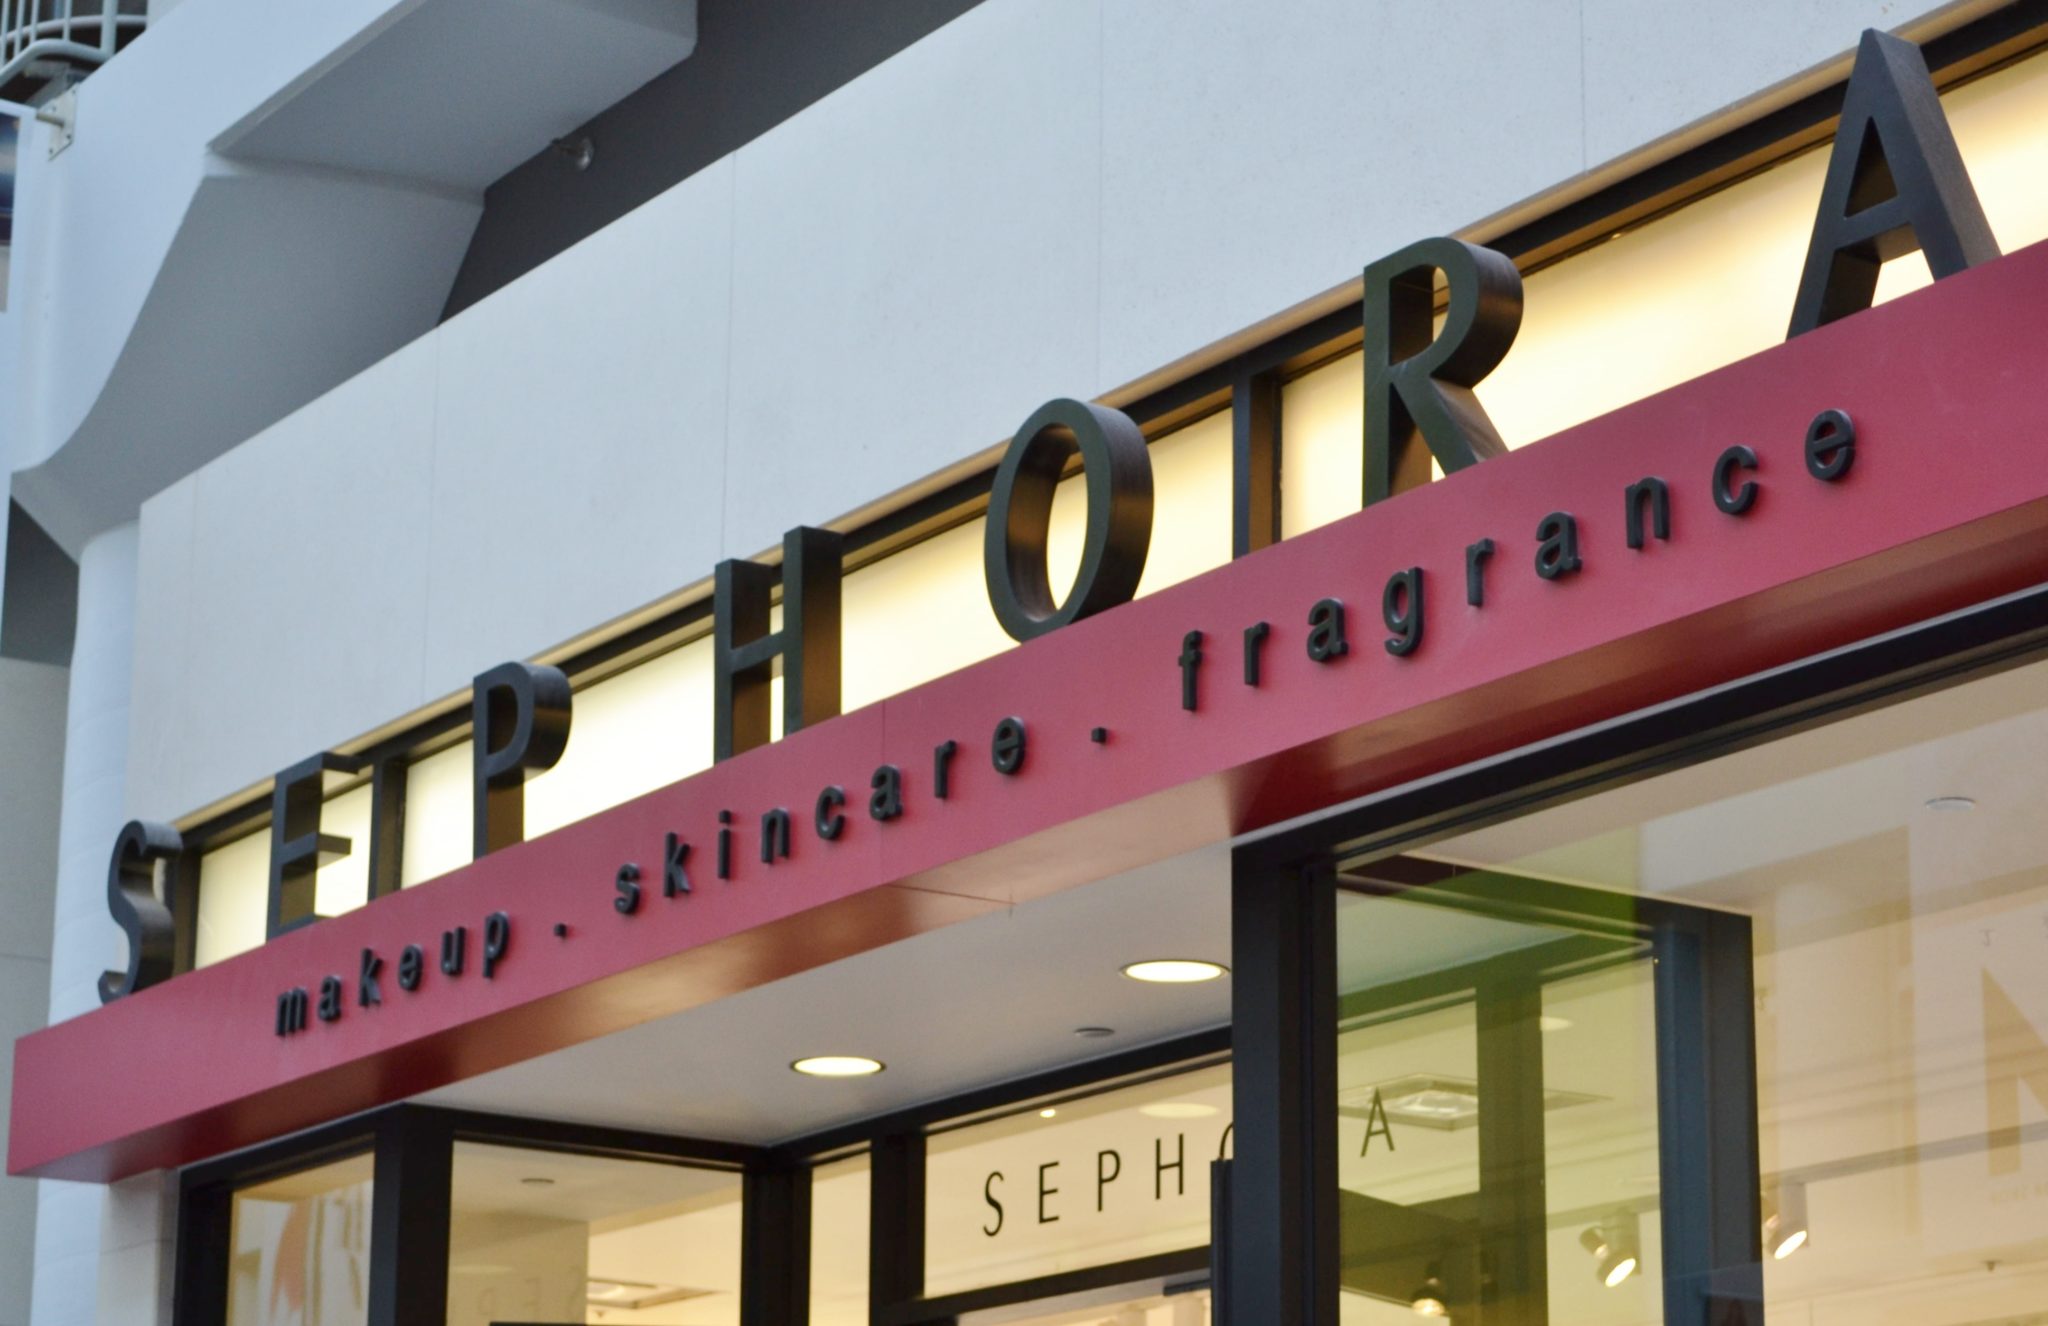 SEPHORA sign and storefront